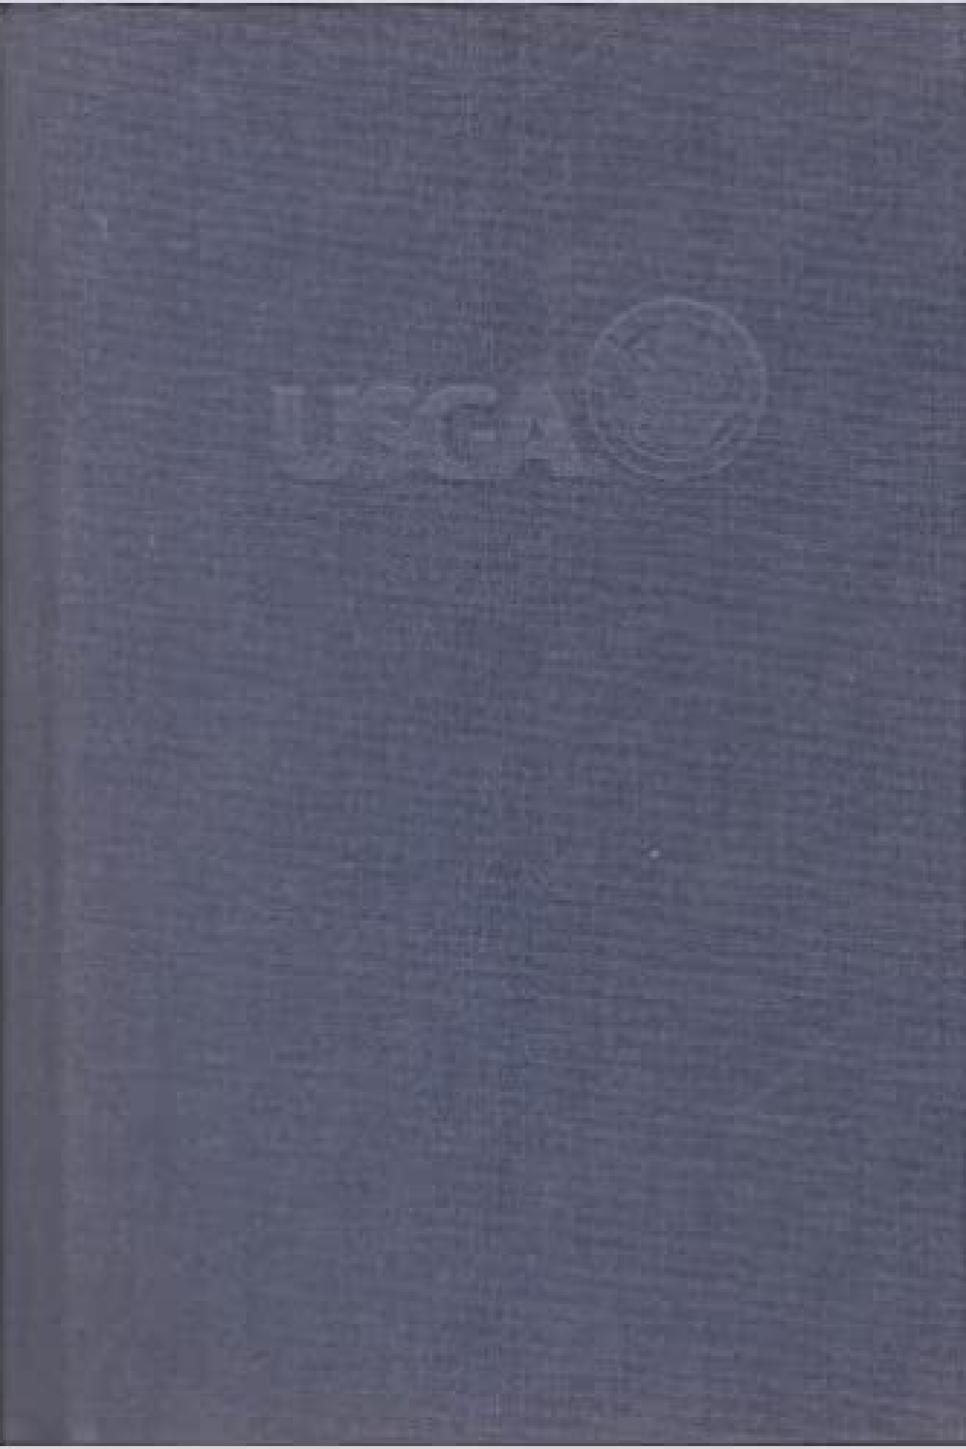 The Principles Behind the Rules of Golf By Richard S. Tufts (1960)